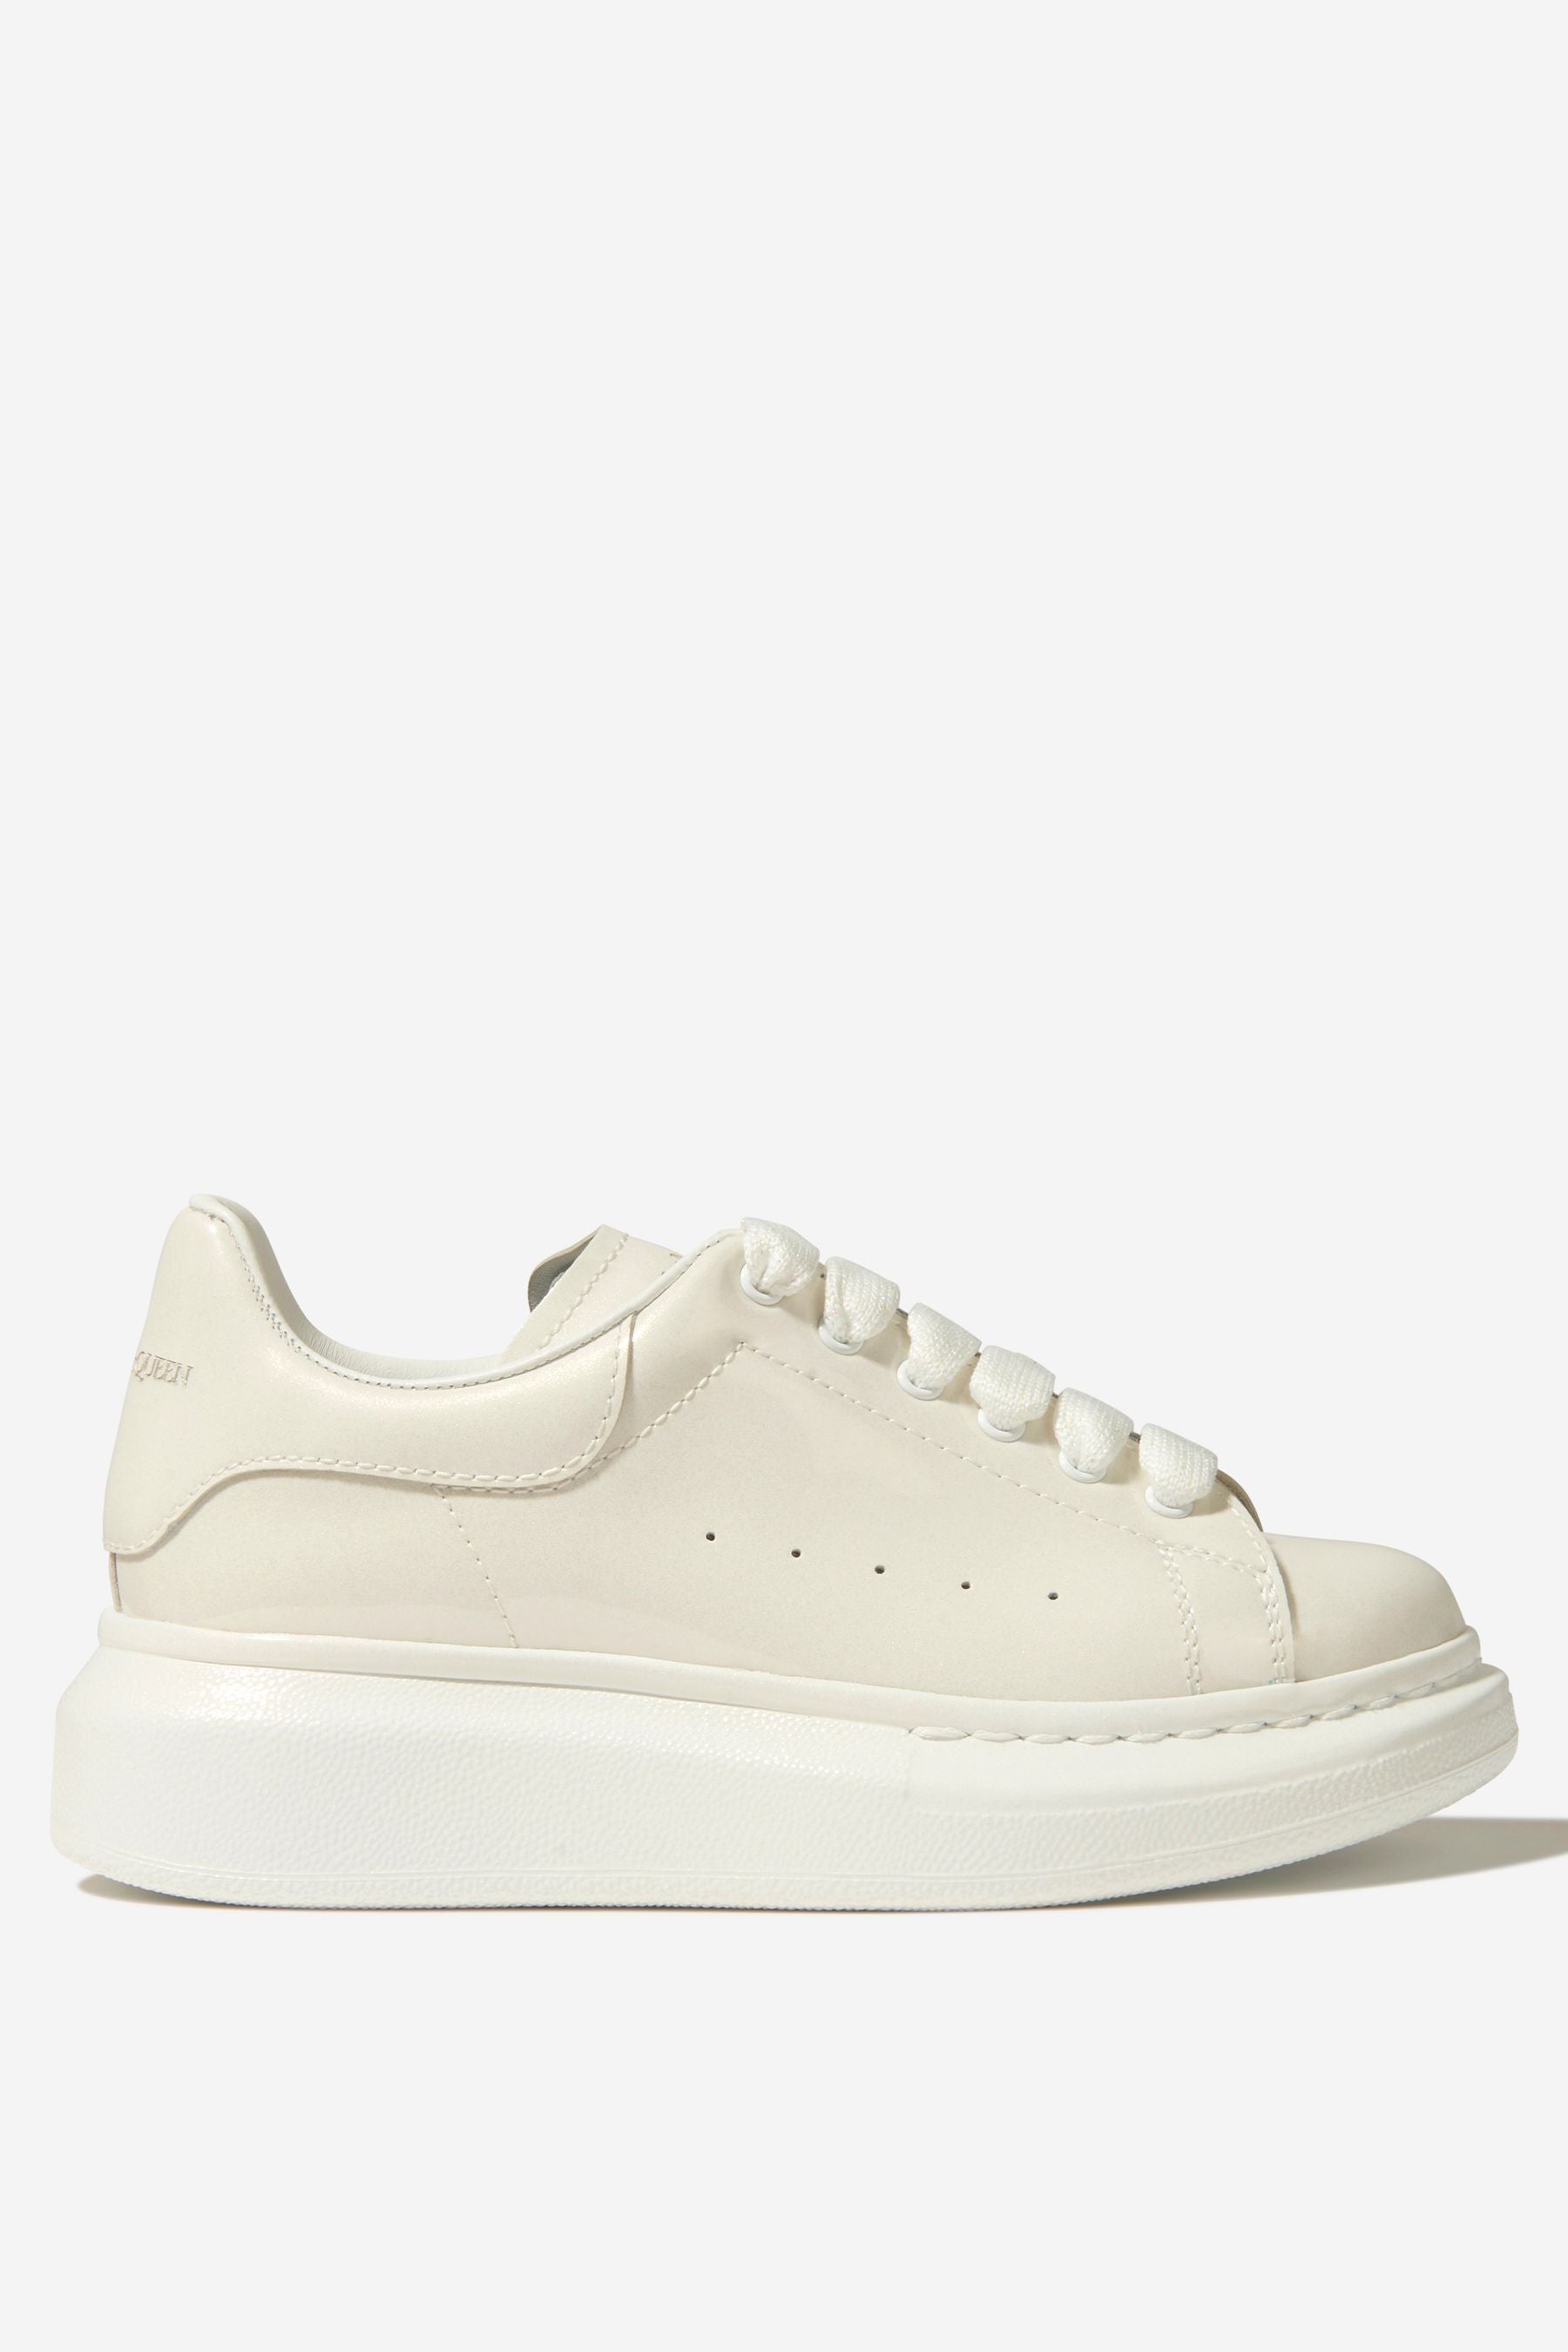 Alexander McQueen Shoes | Trainers, Boots & More | FARFETCH